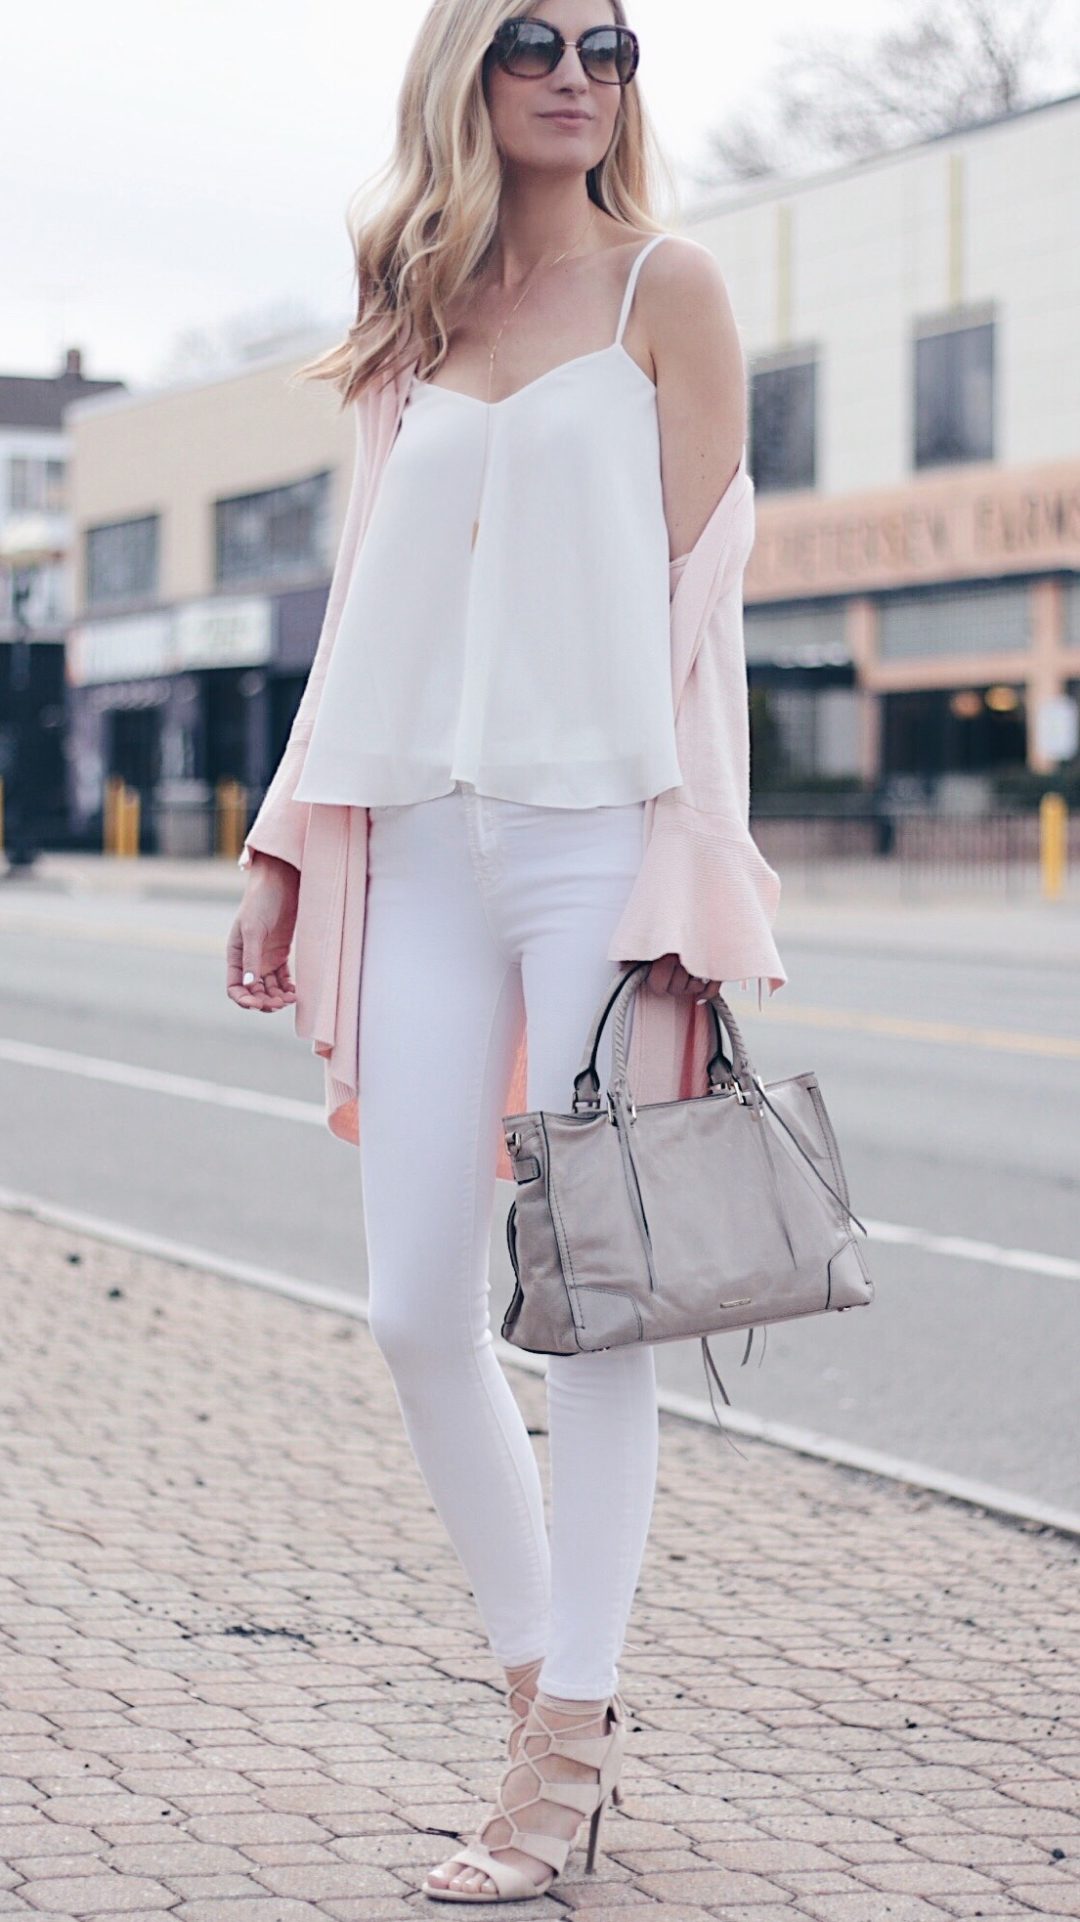 spring cardigan outfit idea